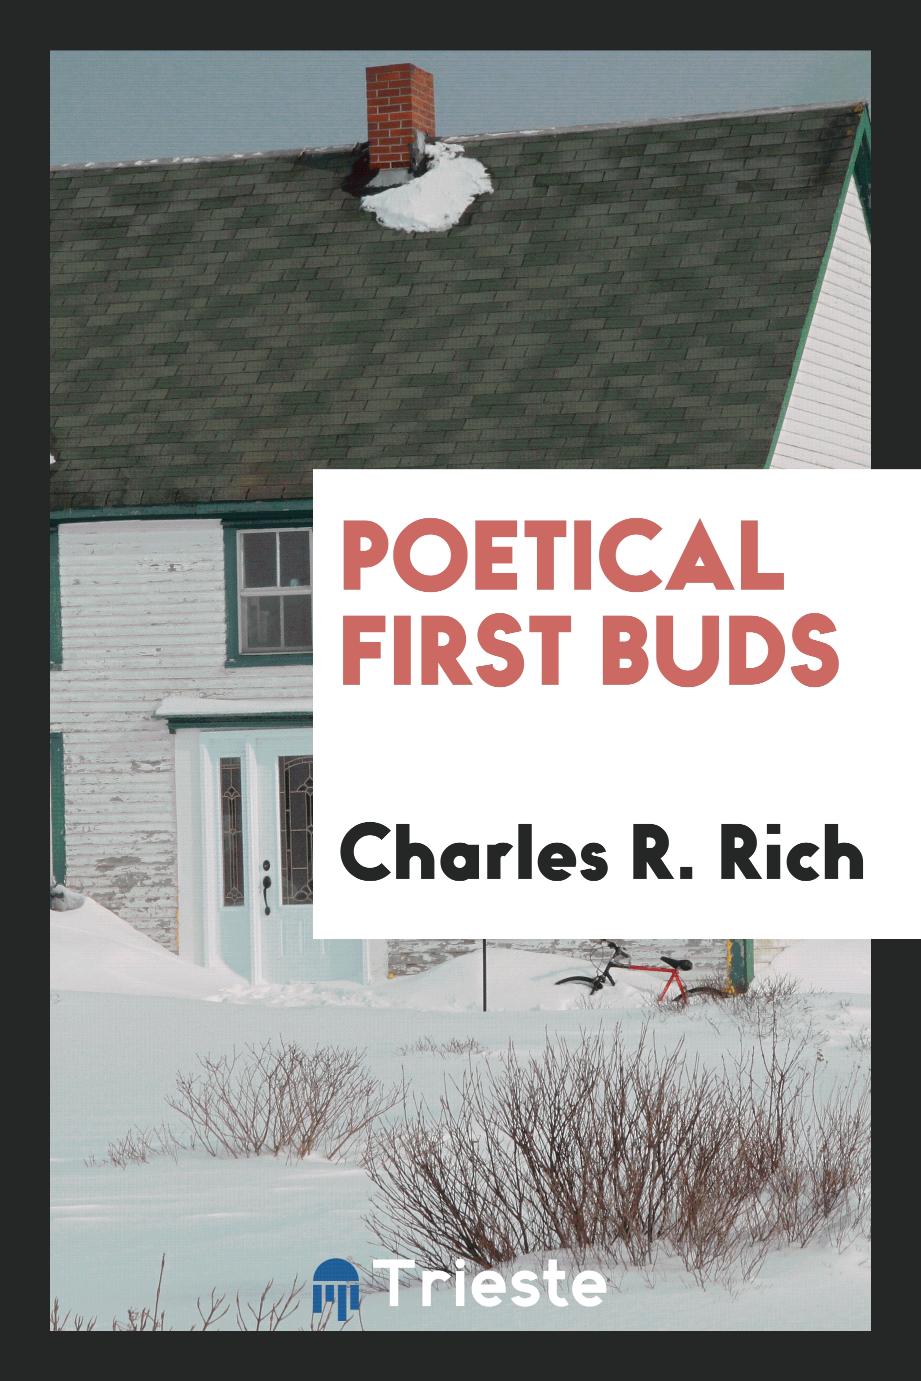 Poetical first buds